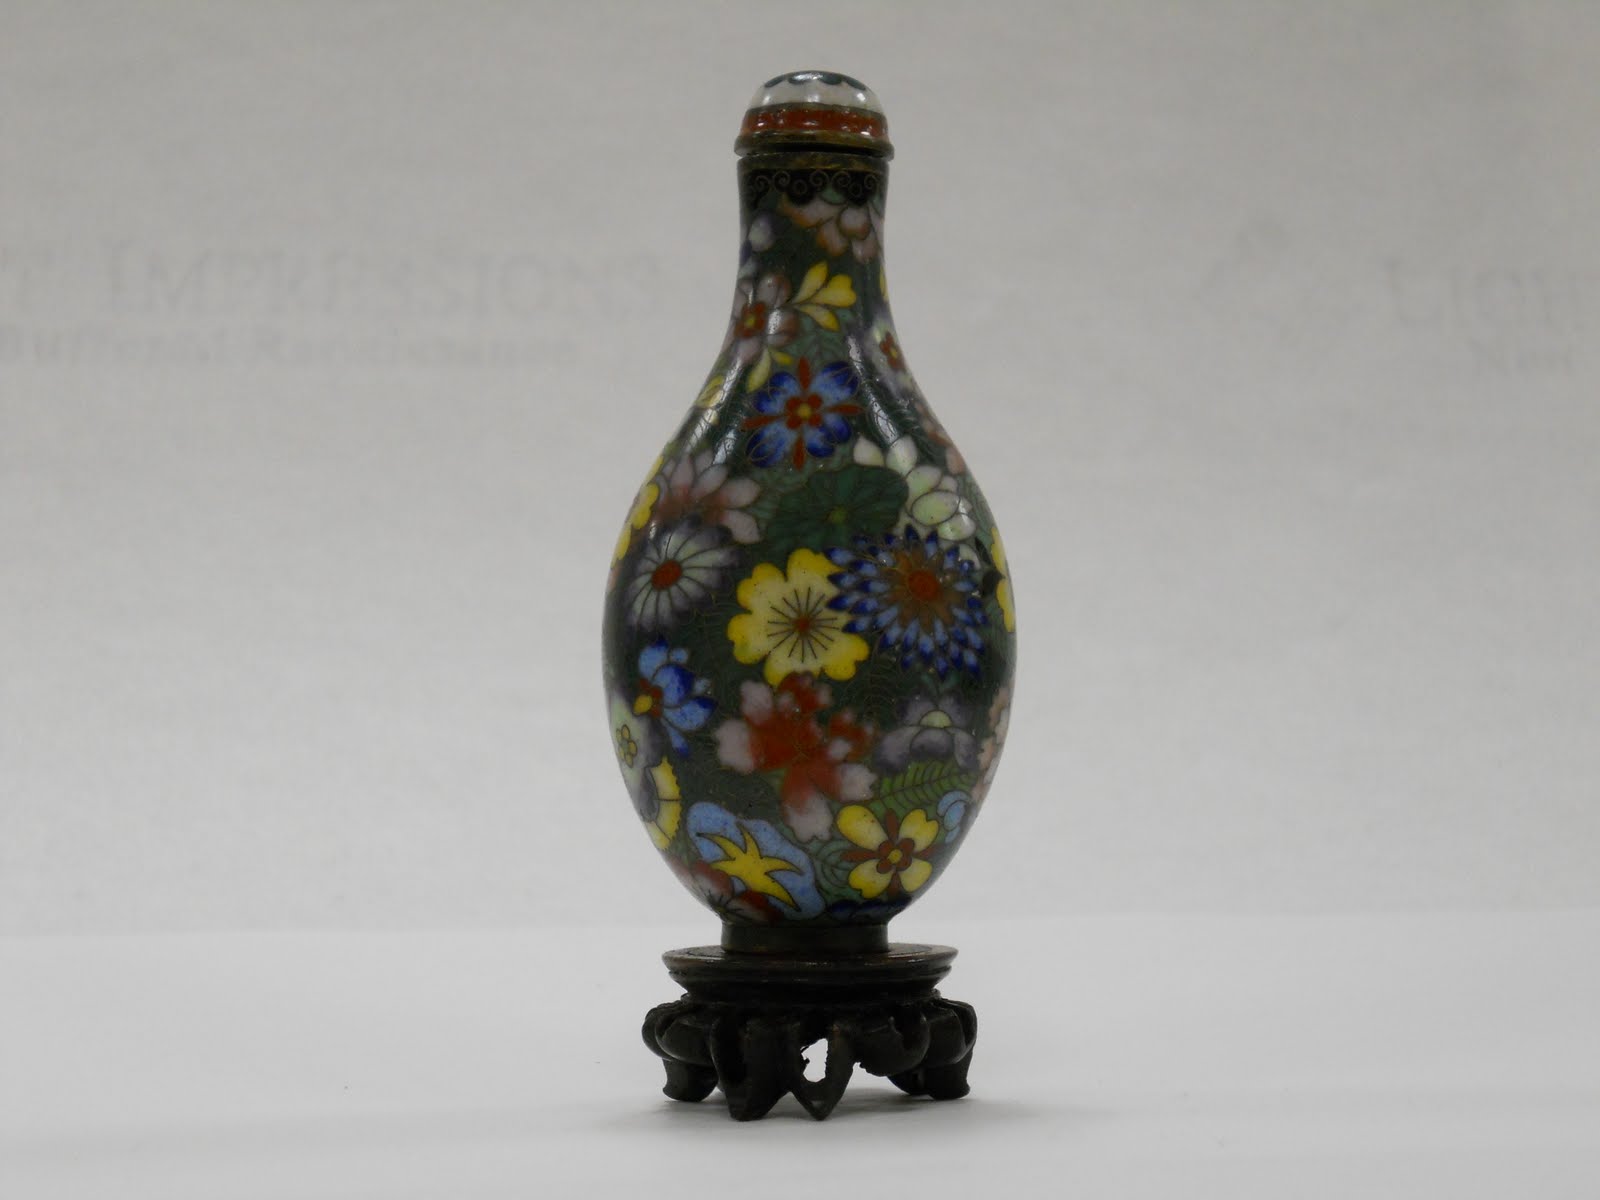 Chinese snuff bottle with colorful flower designs atop a green background